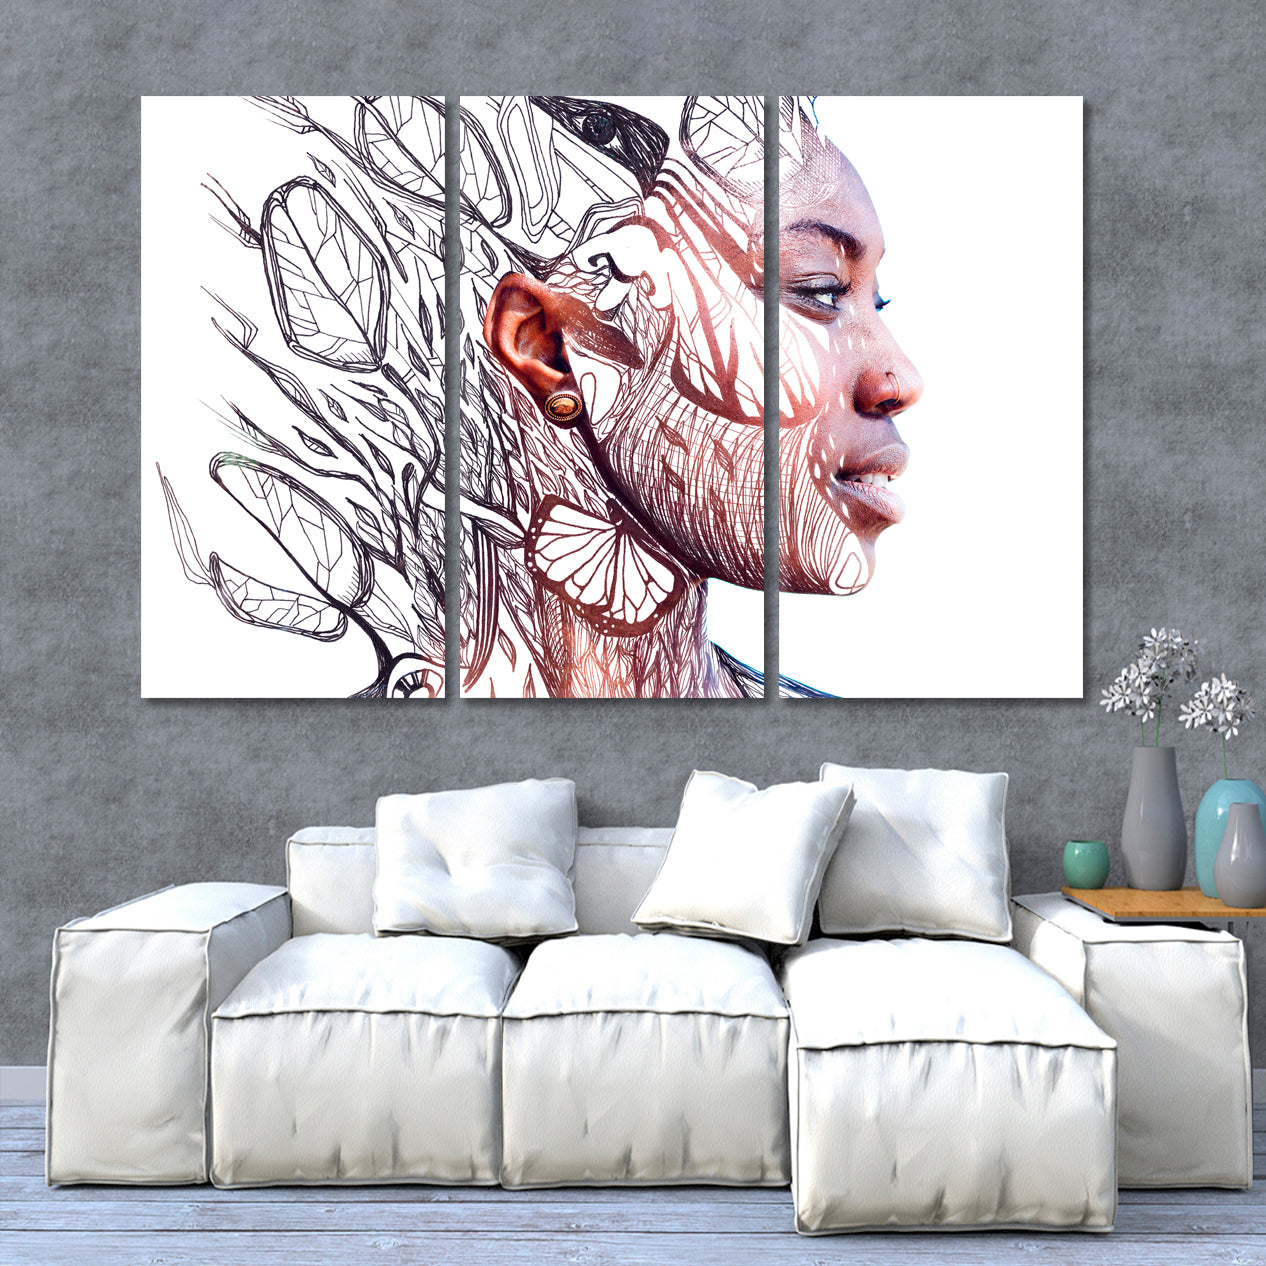 UNITY WITH NATURE Paintography Portrait African American Woman Photo Art Artesty 3 panels 36" x 24" 